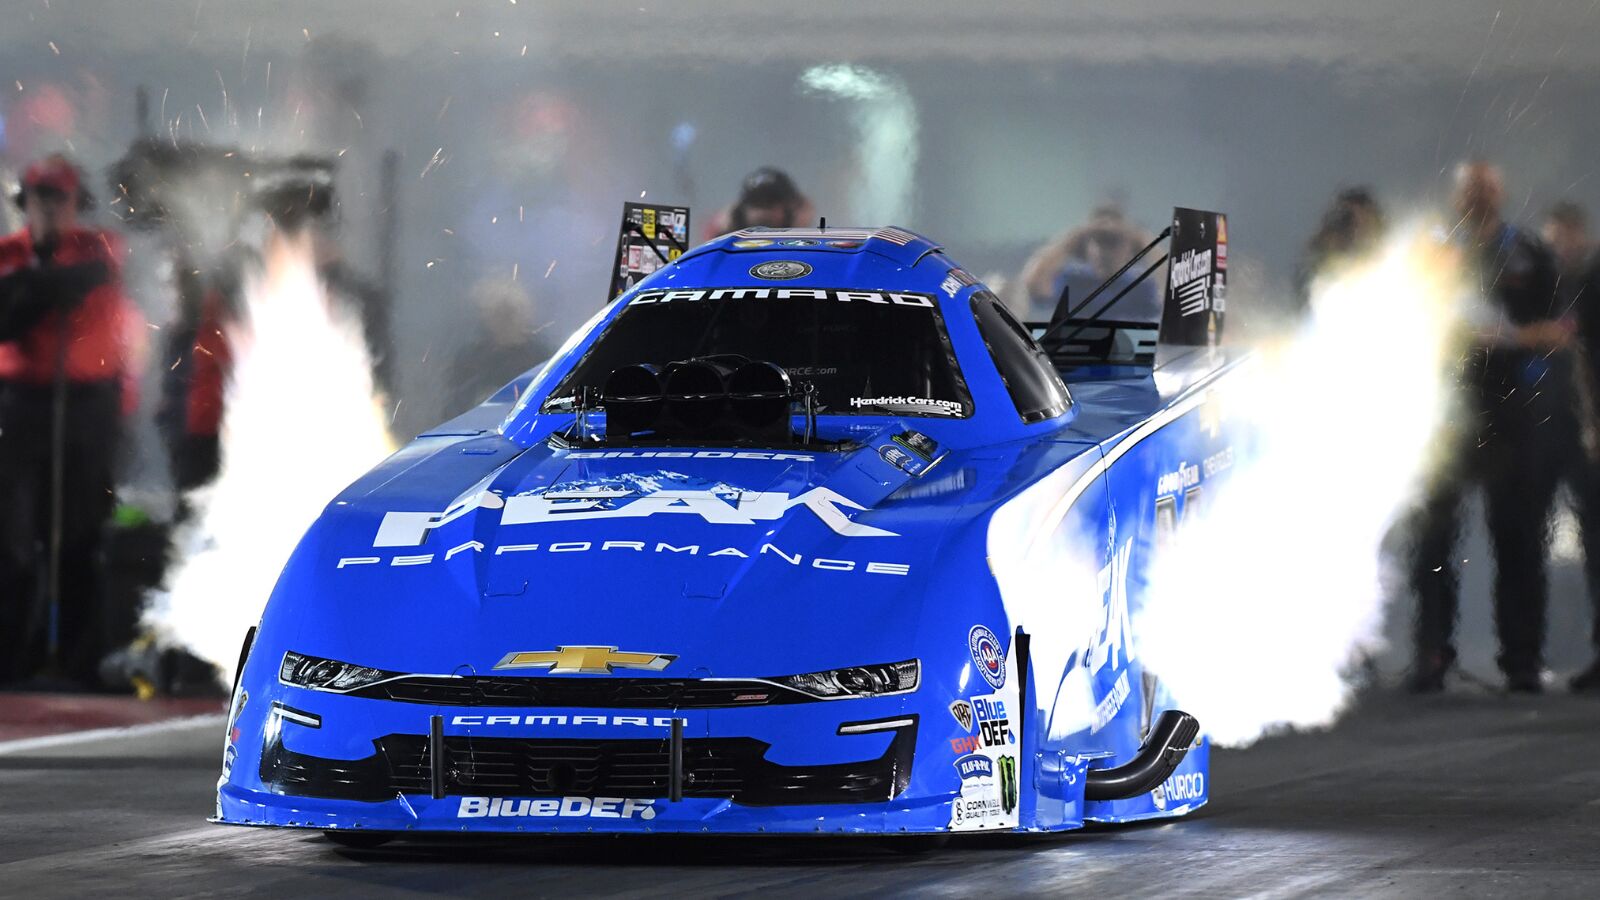 J. Force, Kalitta, Anderson and M. Smith Race to Provisional No. 1 Spots at NHRA 4-Wide Nationals in Charlotte